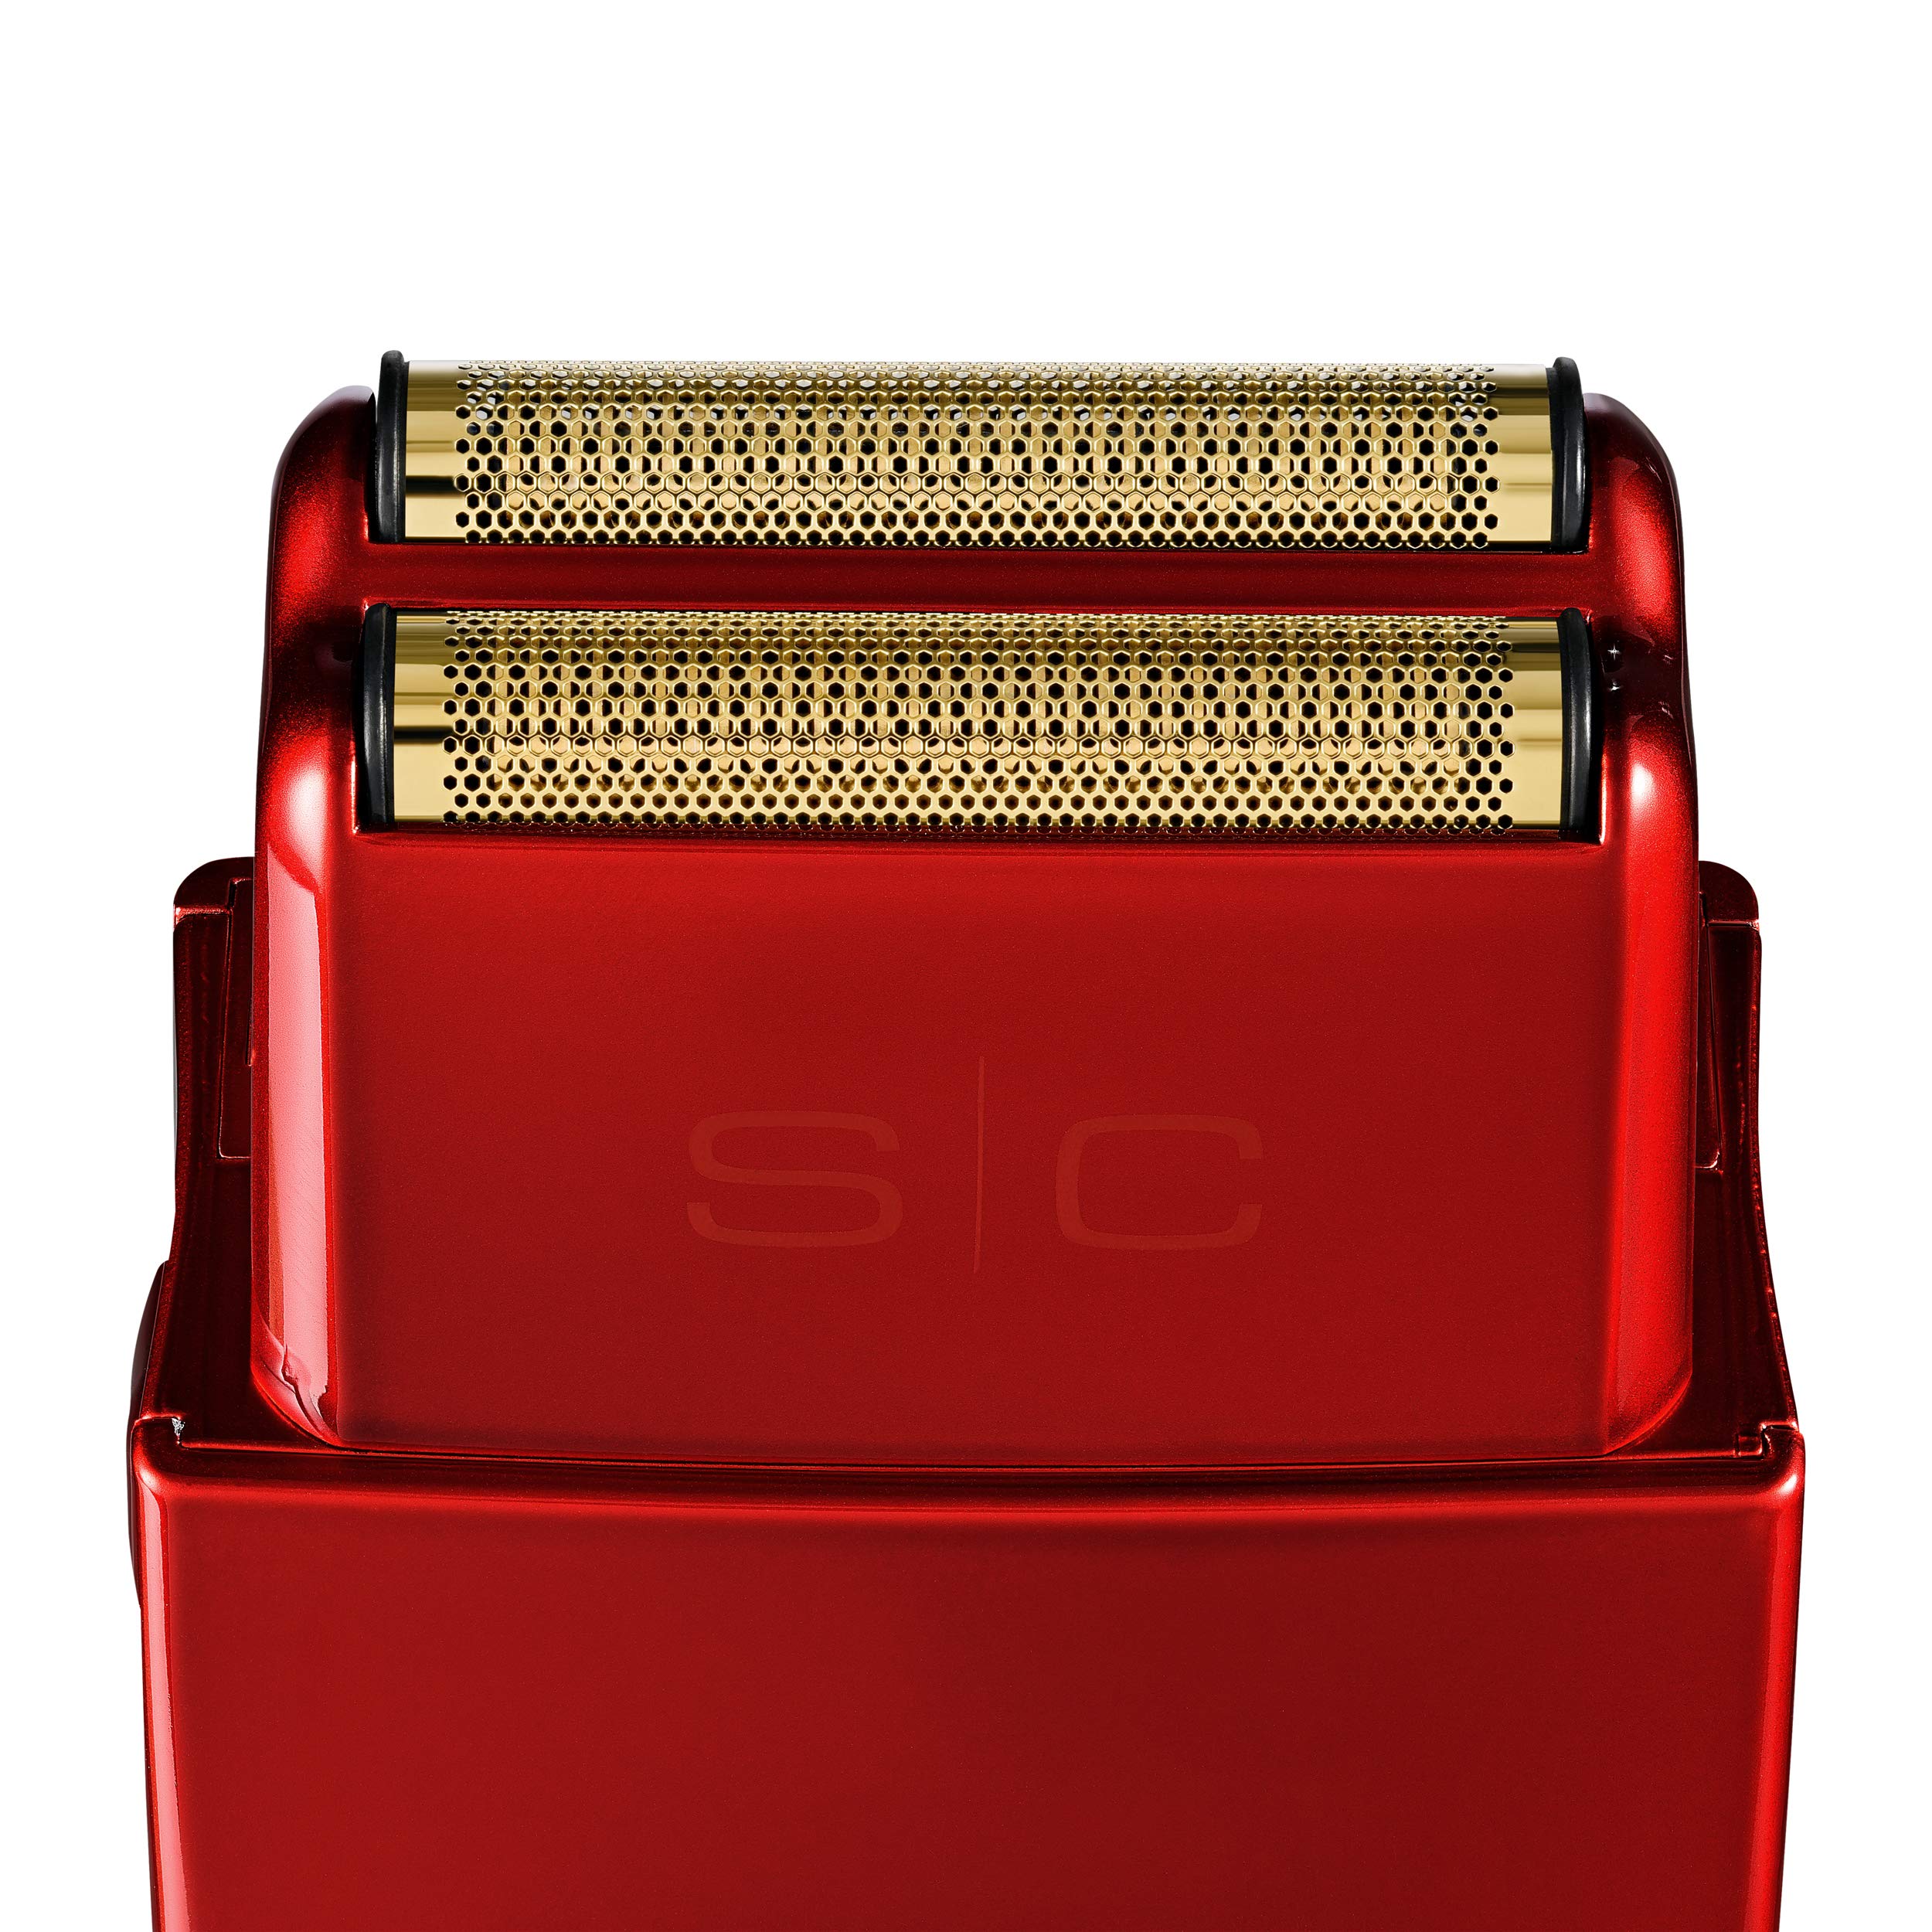 StyleCraft Prodigy Professional Cordless Hypoallergenic Gold Foil Shaver with Cap, Matte Metallic Red